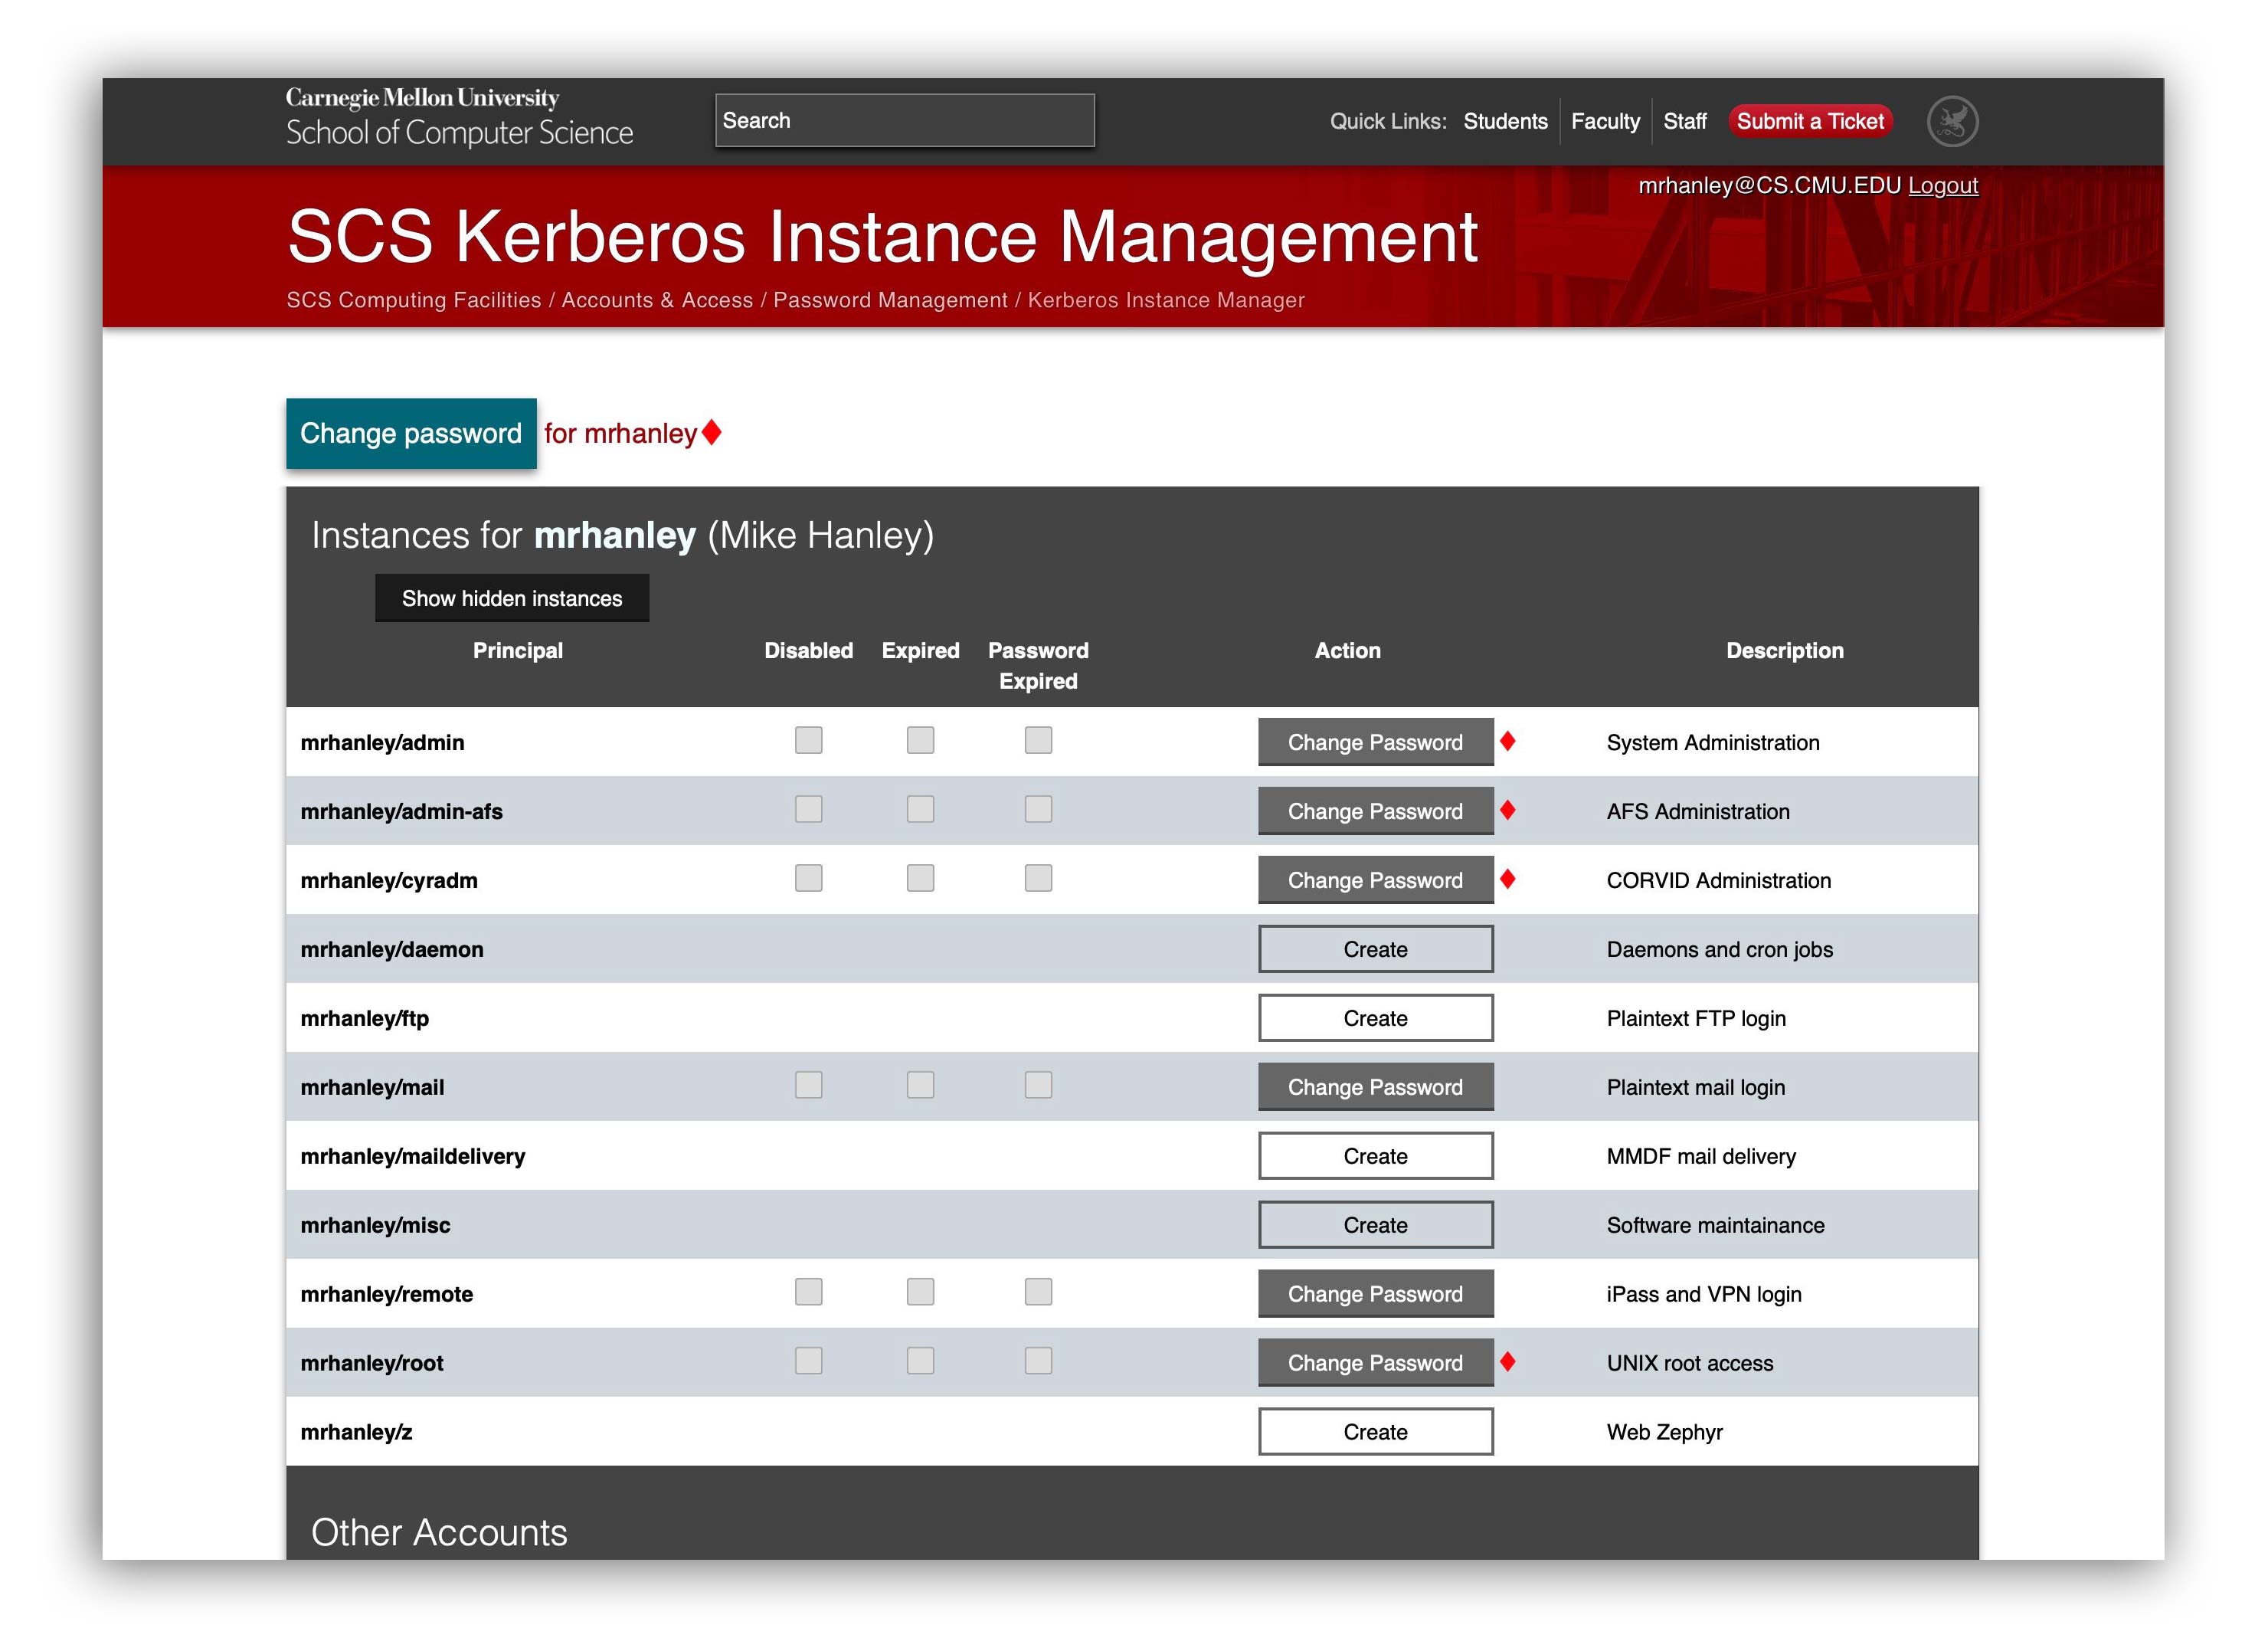 The new Kerberos Instance Manager appearance.